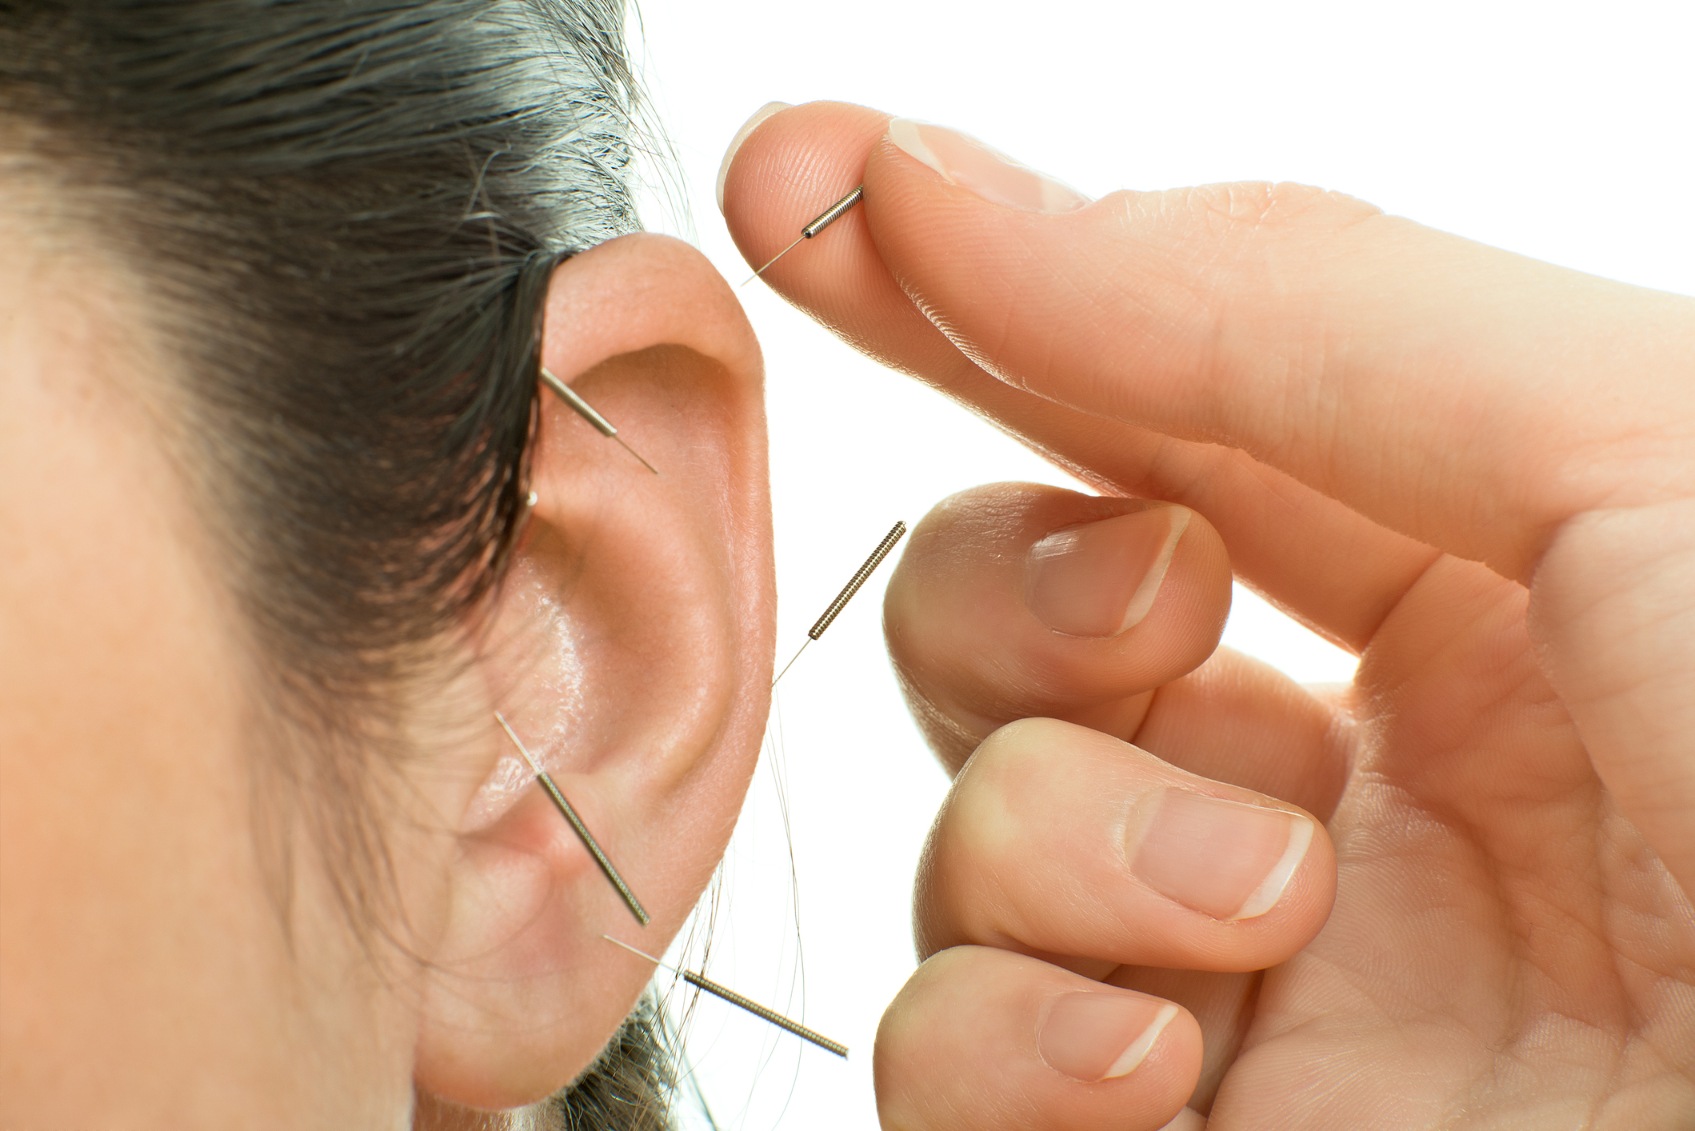 hand inserting acupuncture needles into ear